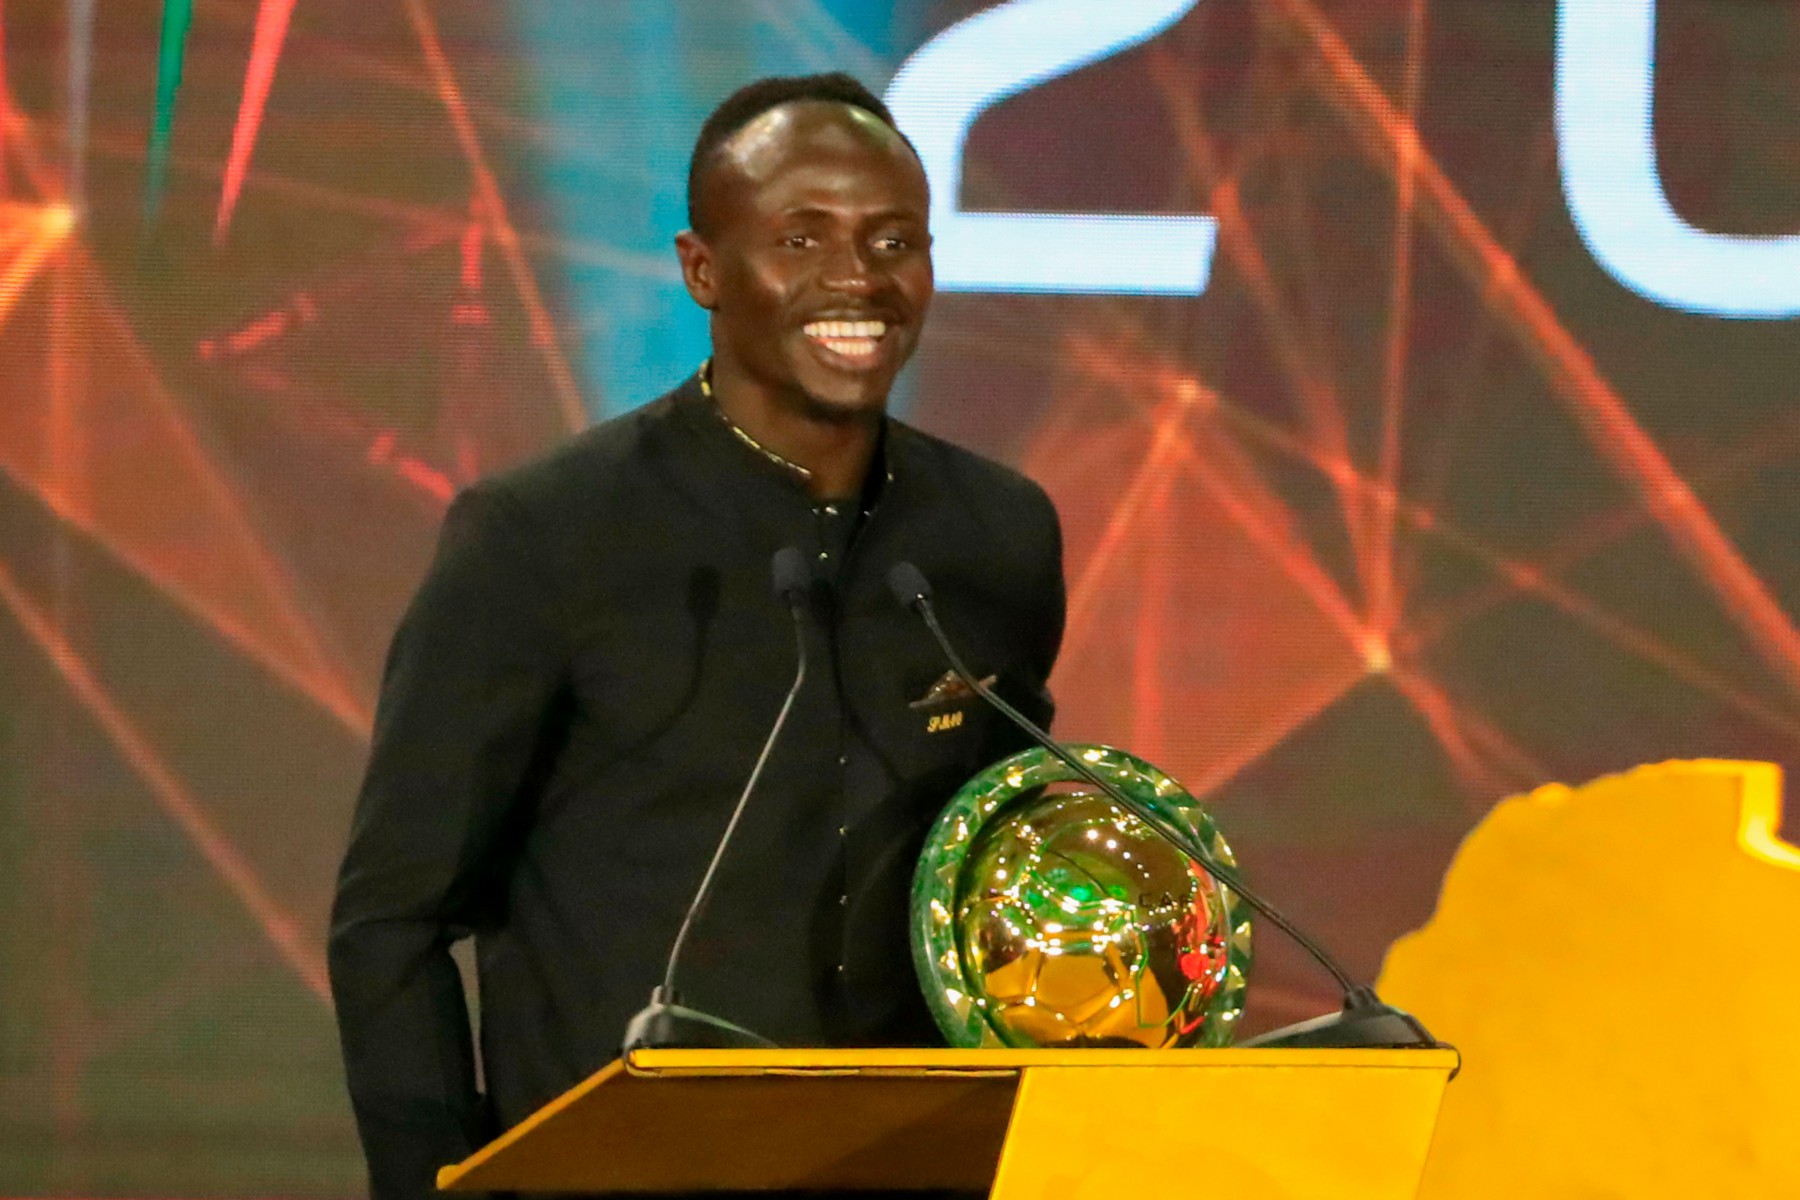 , Sadio Mane beats Salah and Mahrez to be named African Player of the Year after stunning goal-heavy Liverpool season